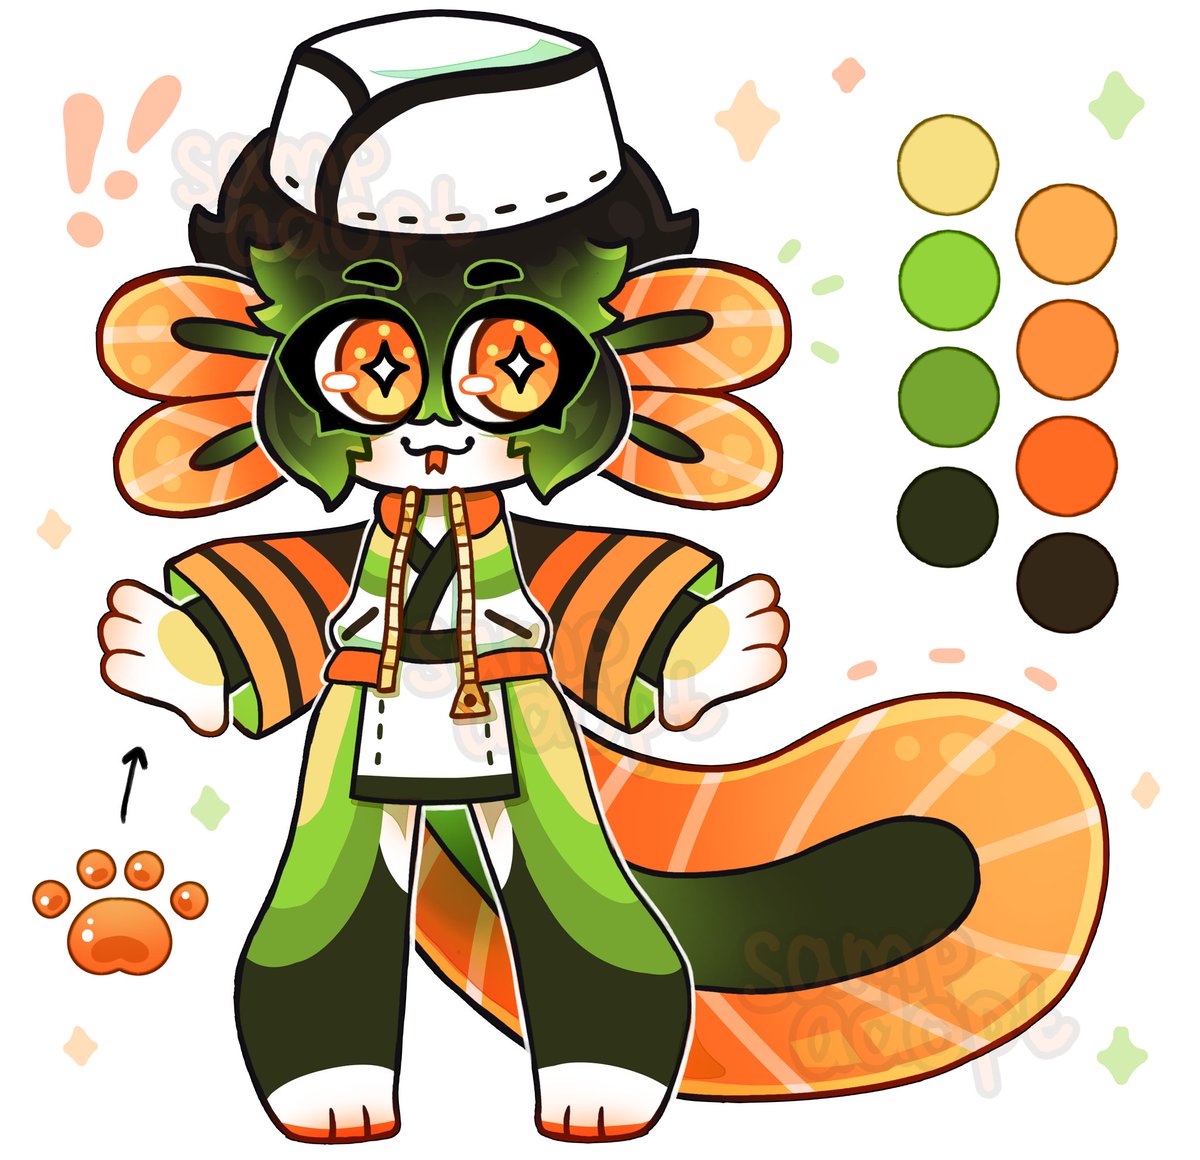 (Salmon Sushi-chef) adopt auction (OPEN)   
Sb: 15 USD   
Ab: 70 USD
bid will only last for 24 hours after the last bid

#adoptables #Auction #adoptable #Adopt #adopts #adoptableauction #adoptsopen #auctionopen #adoptableopen